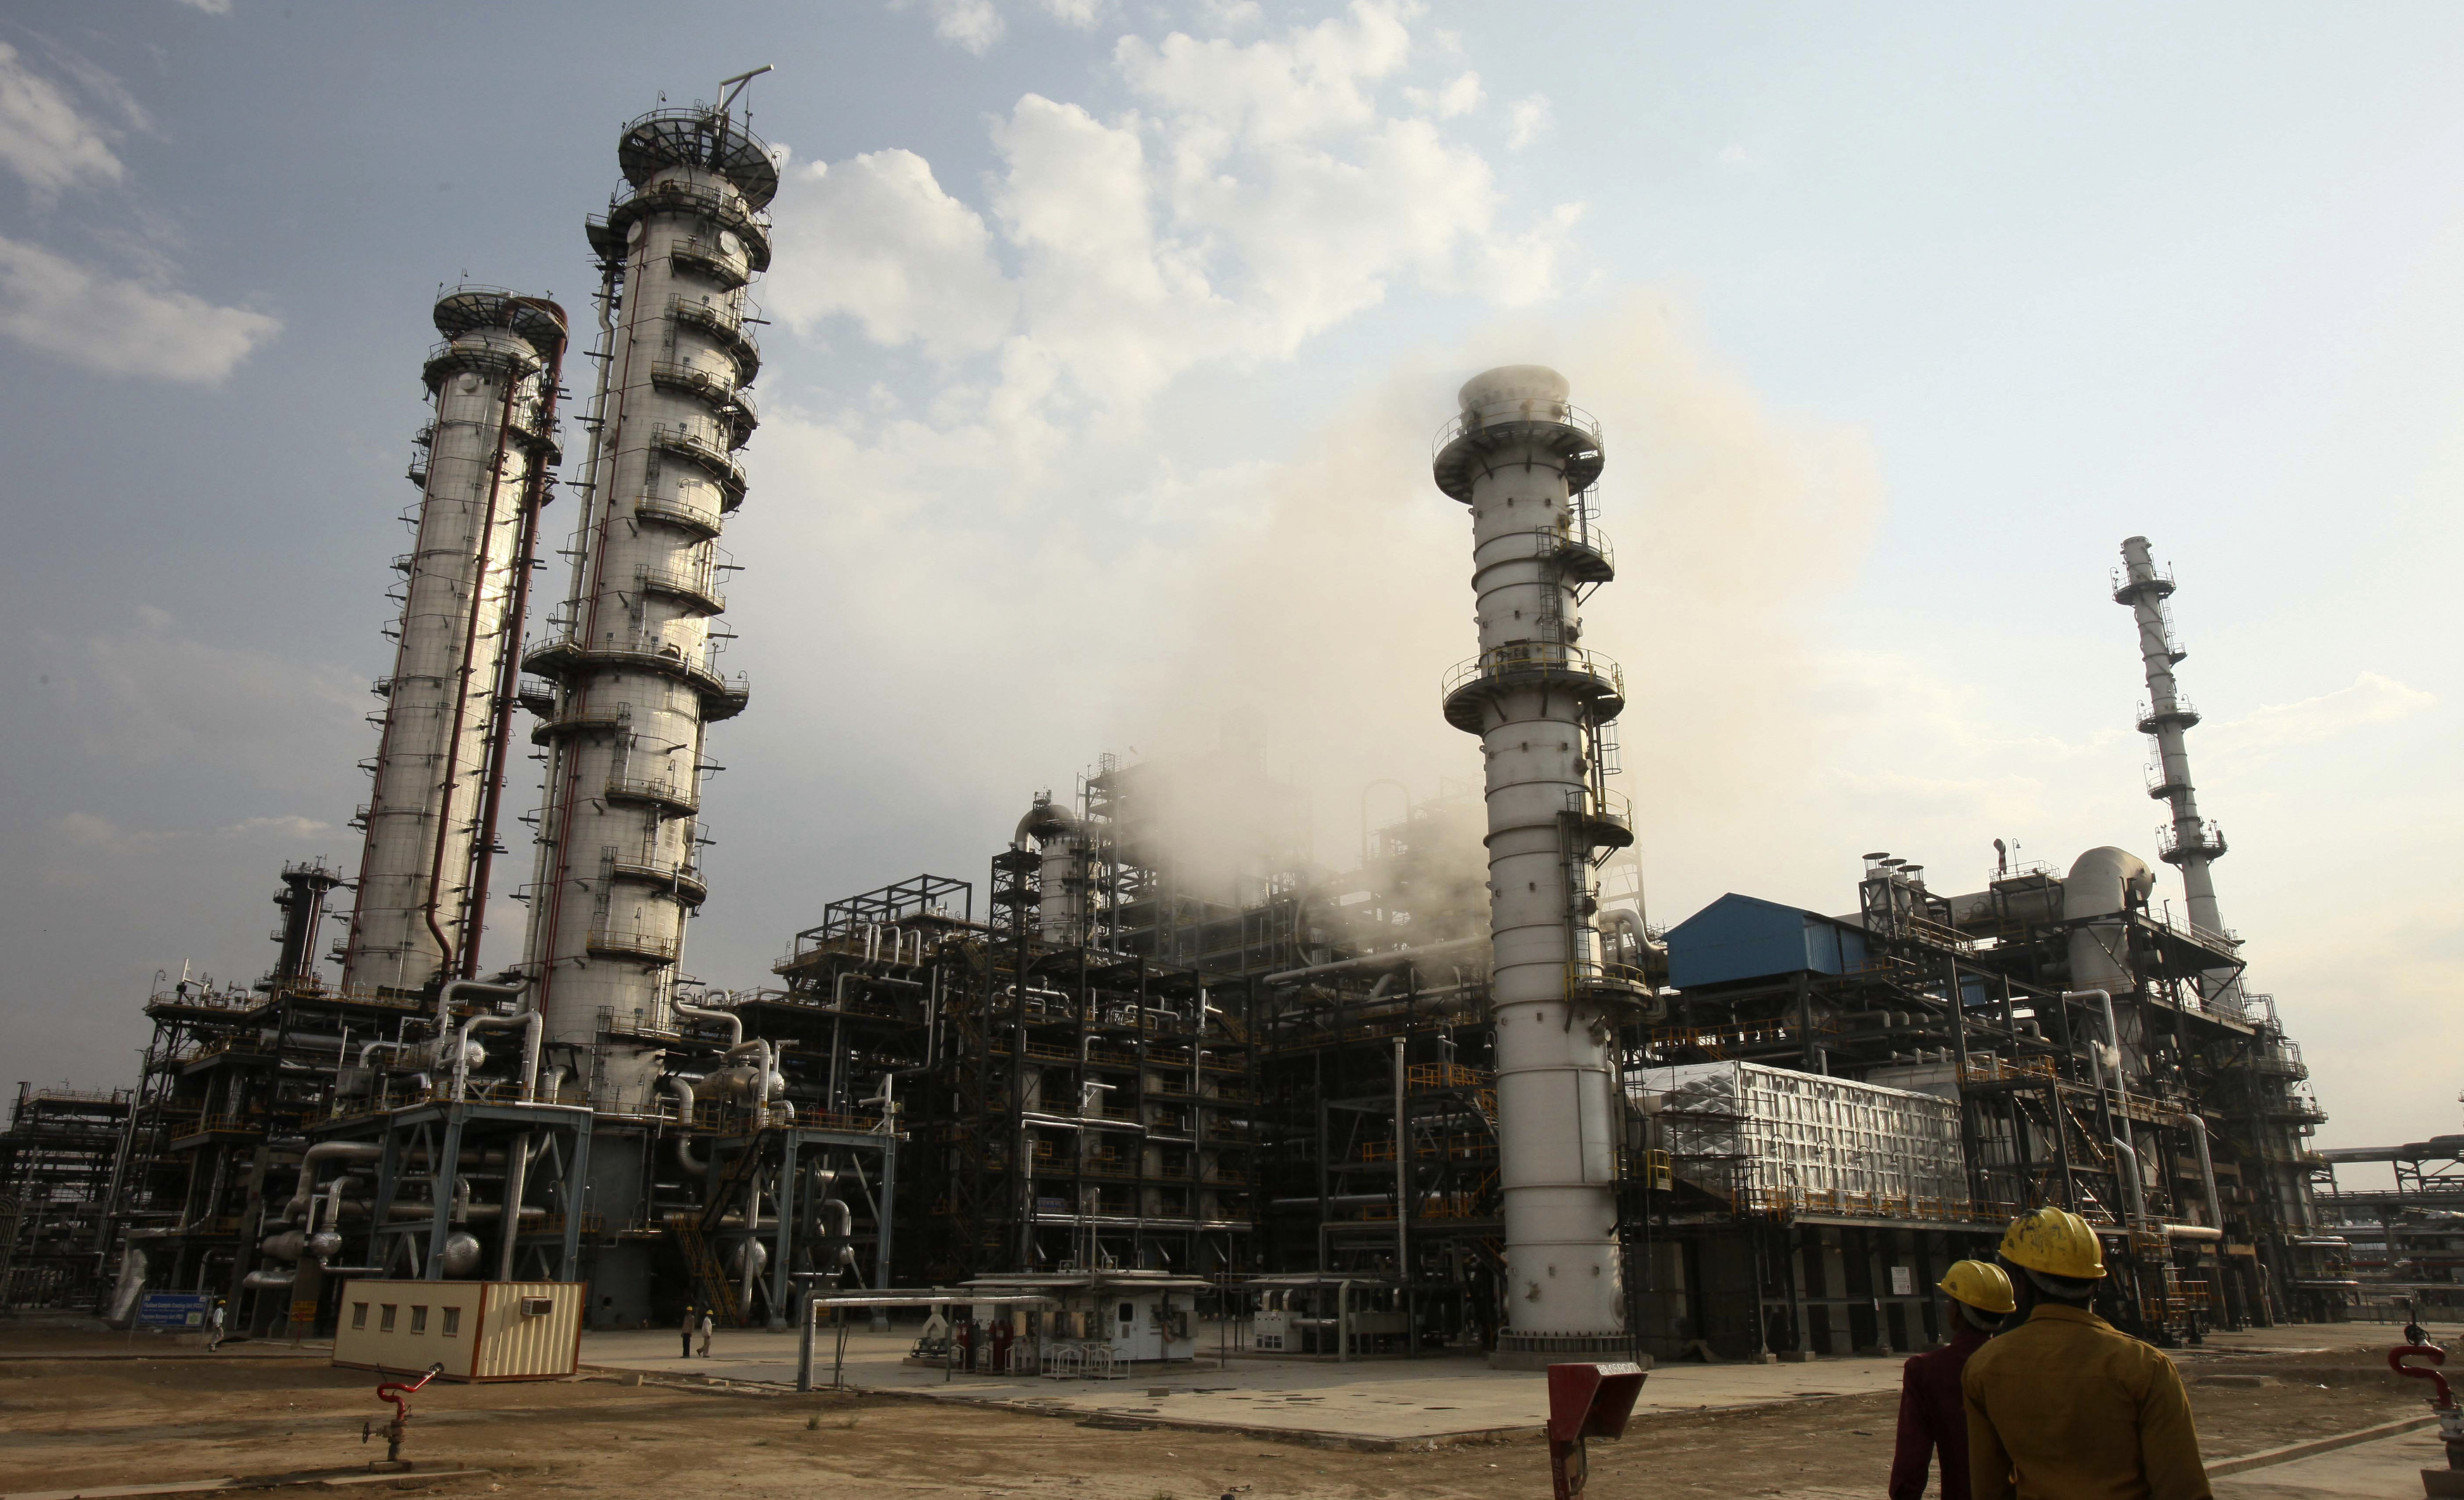 Workers walk inside the complex of Guru Gobind Singh oil refinery near Bhatinda in the northern Indian state of Punjab